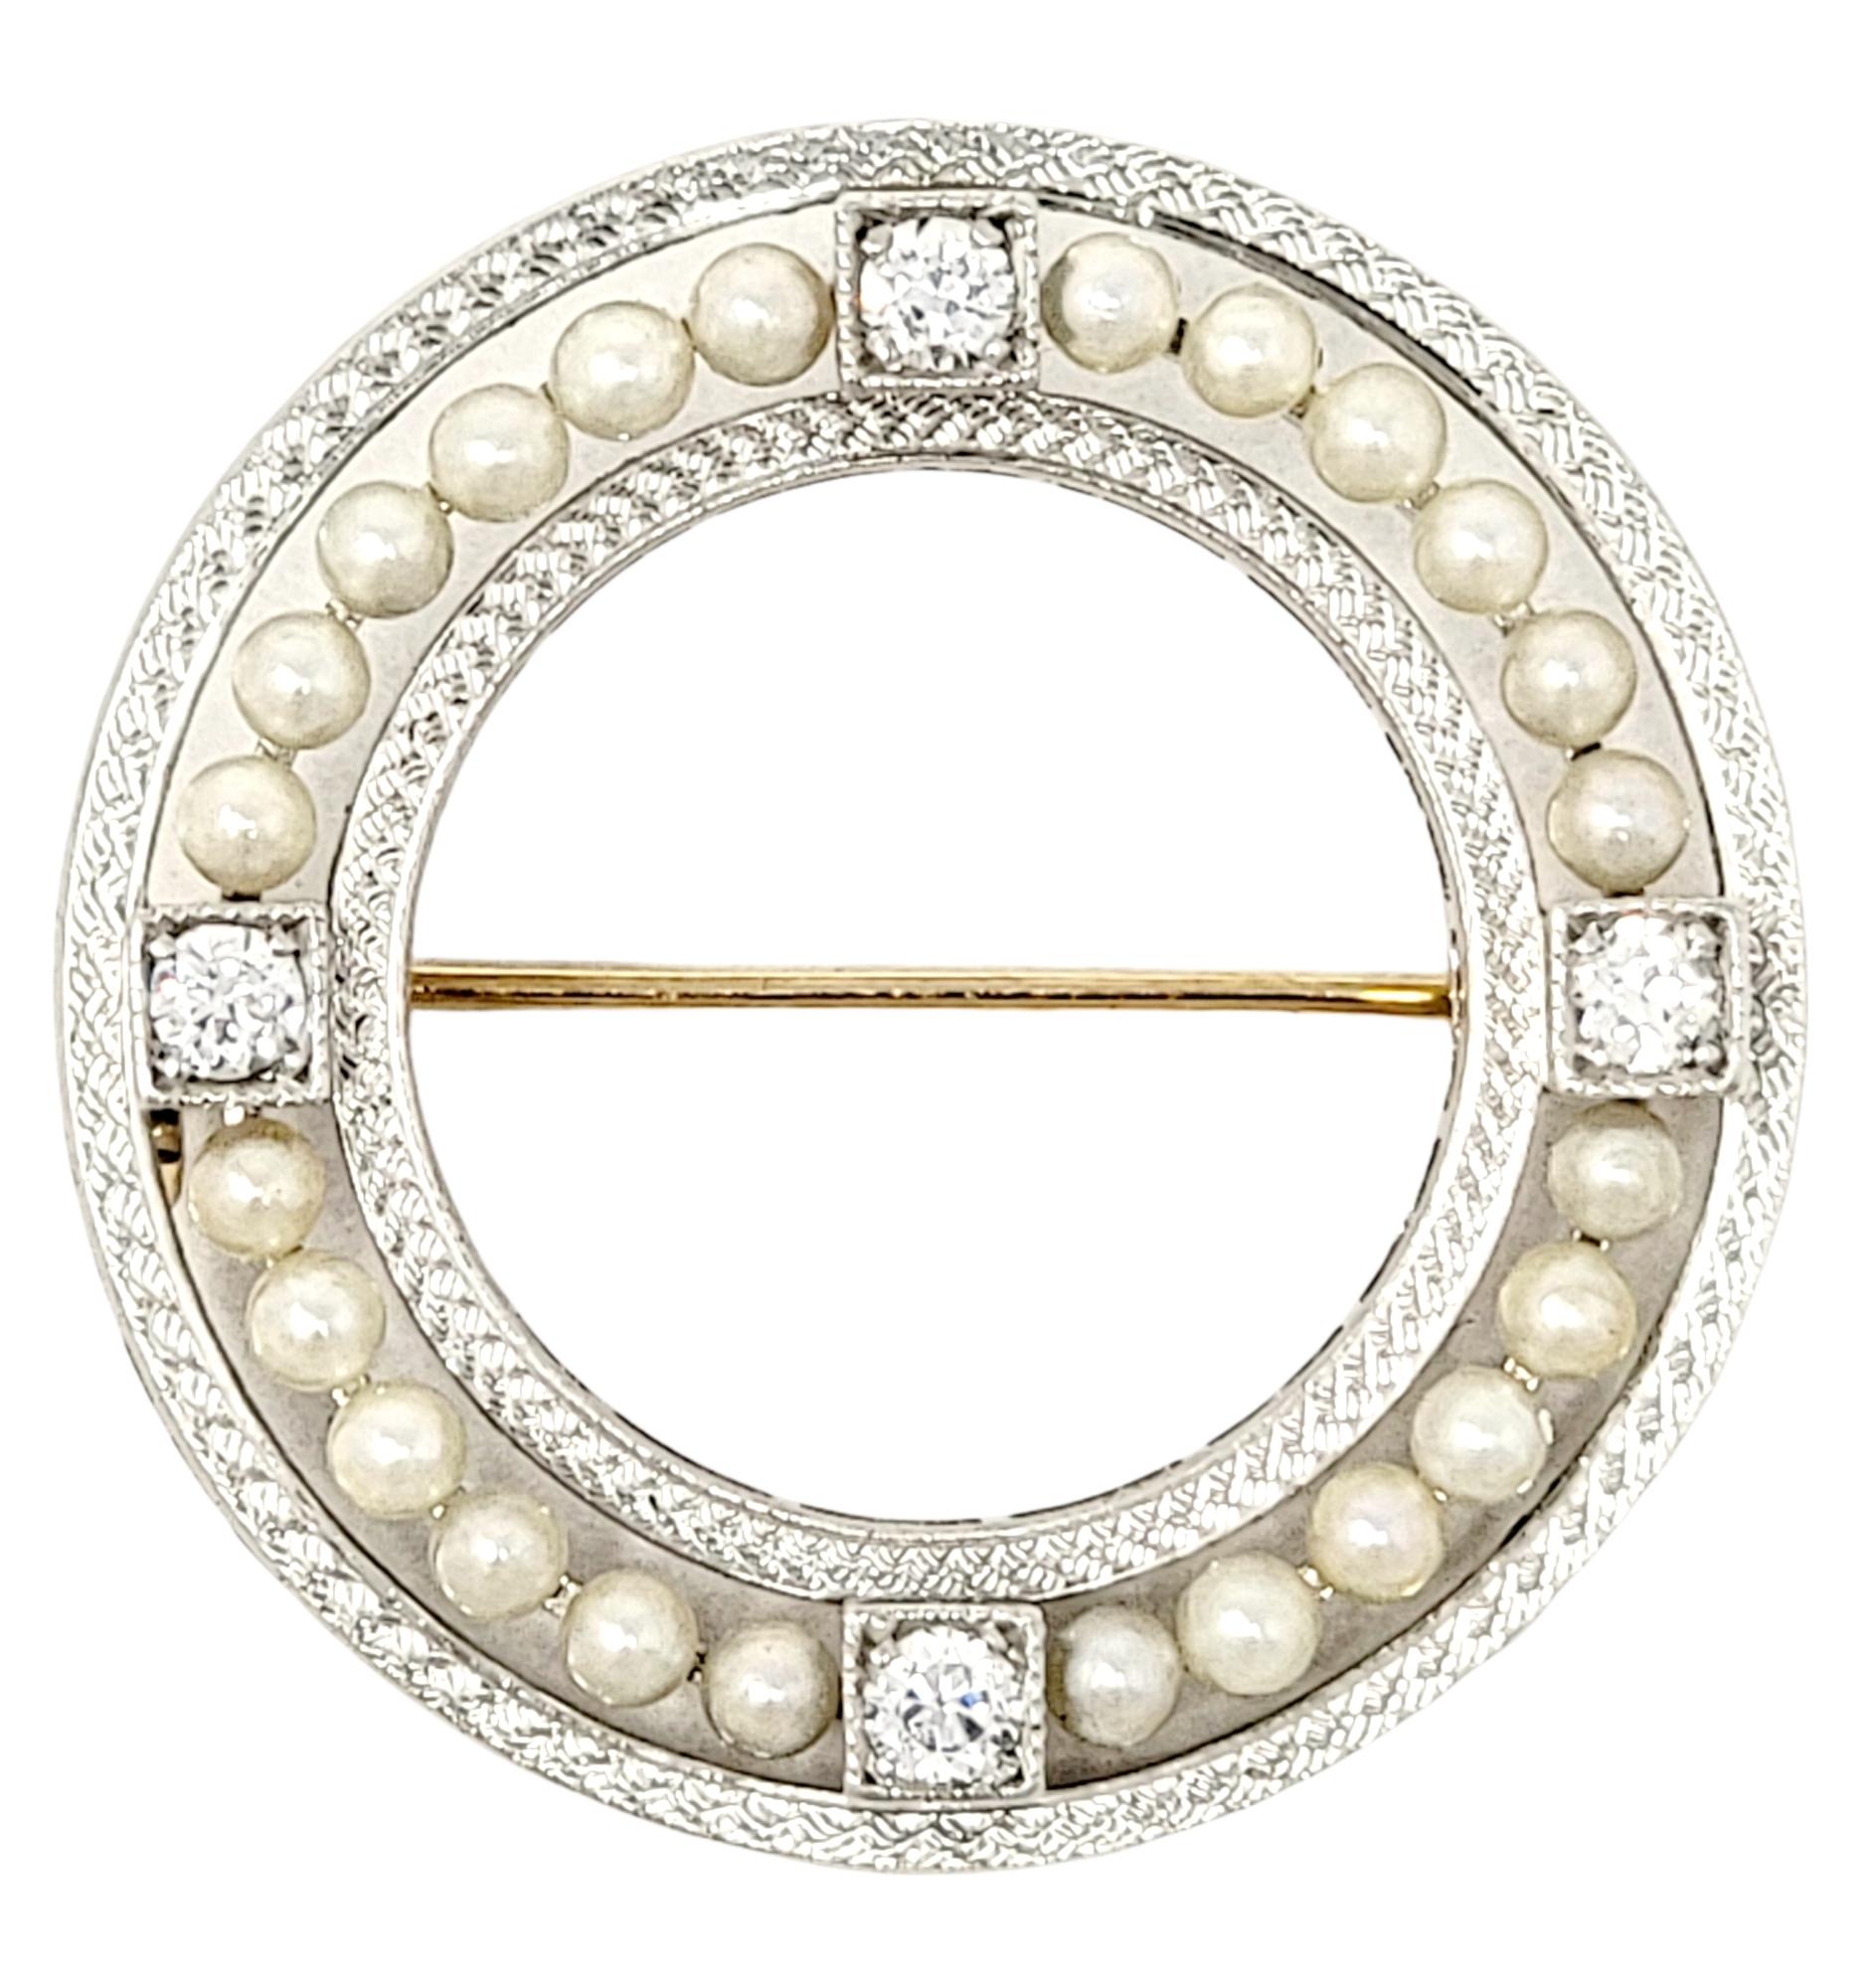 Simple yet elegant platinum circle brooch with herringbone detail, accented by delicate seed pearls and natural glittering diamonds. 

Metal: Platinum and 14K Yellow Gold
Closure: Hinged stick pin
Seed Pearls: 24
Natural Diamonds: .25 ctw 
Diamond